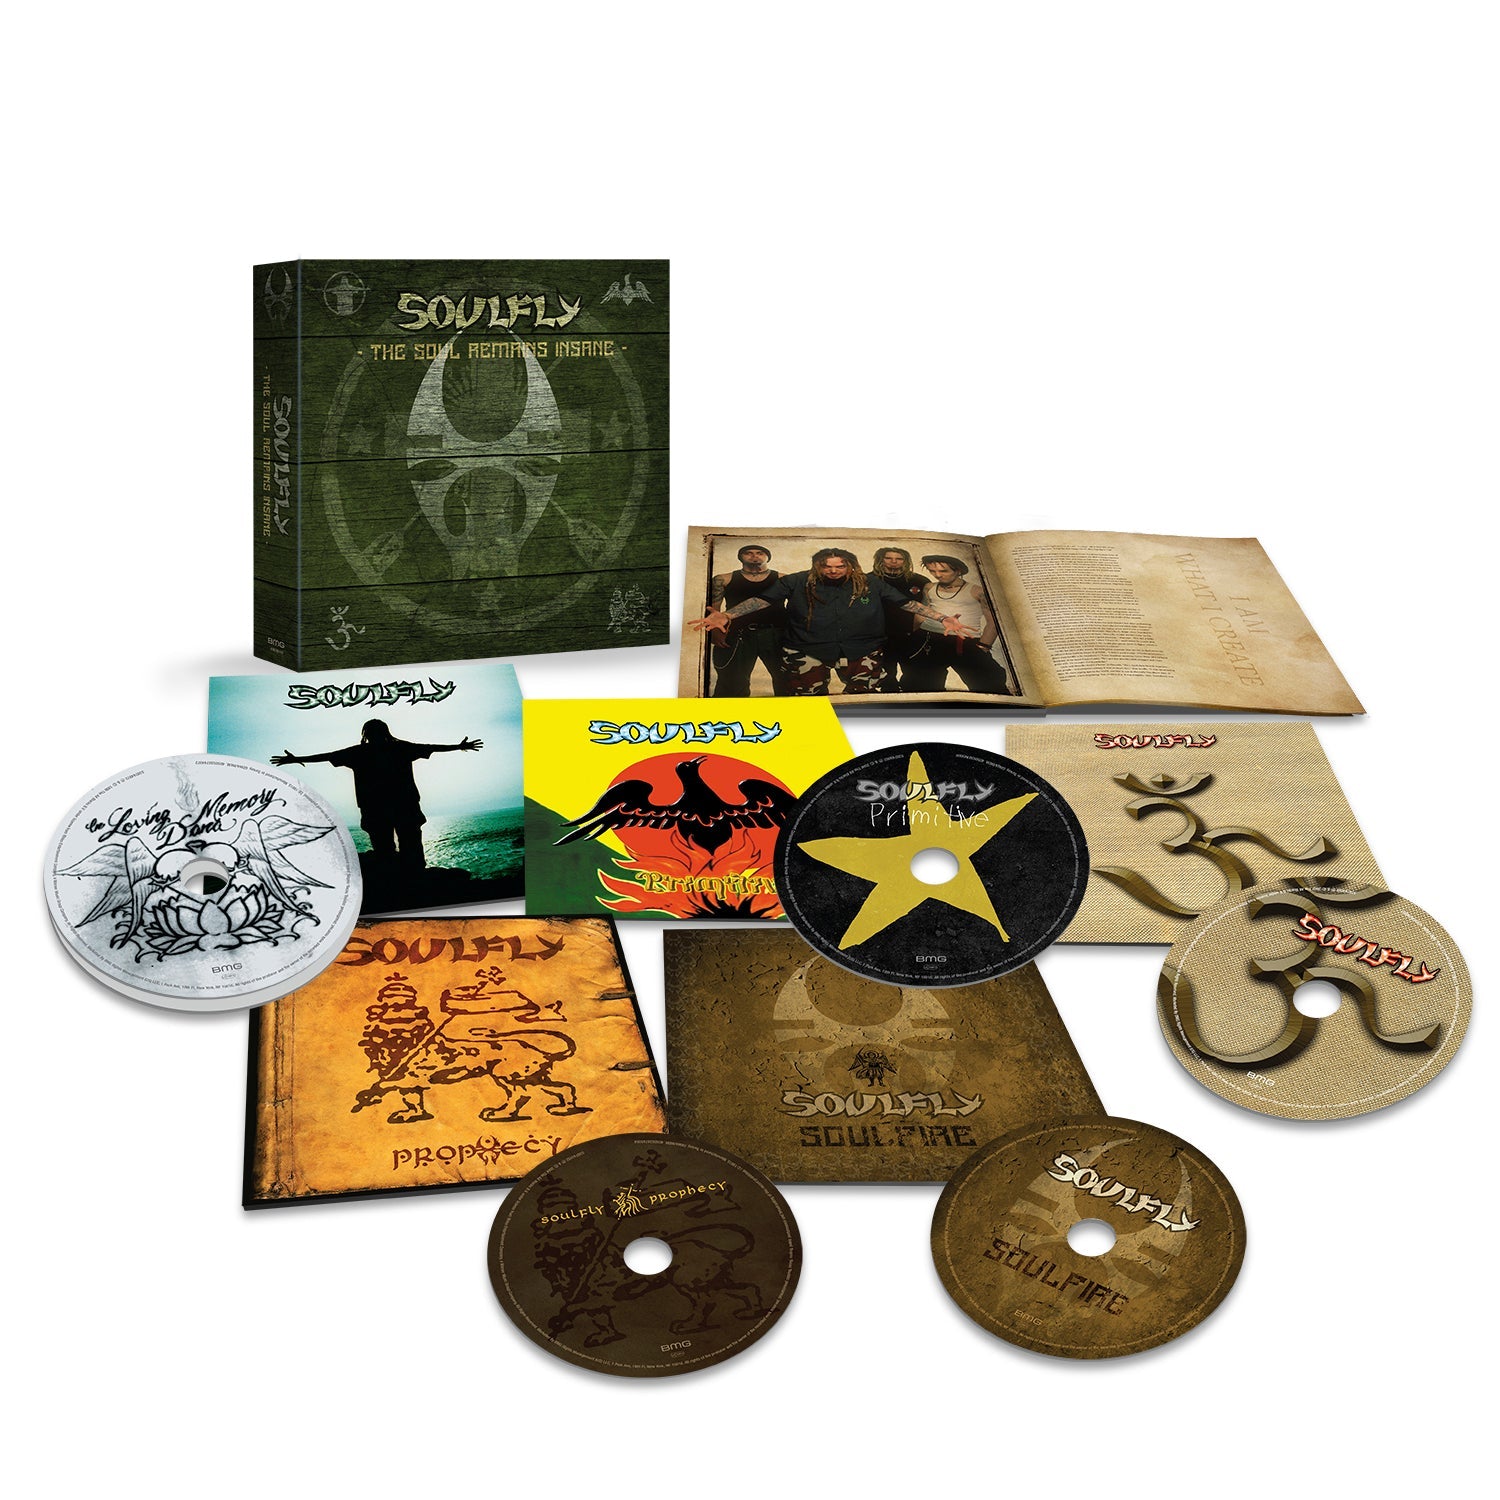 SOULFLY 'THE SOUL REMAINS INSANE: THE STUDIO ALBUMS 1998 TO 2004' CD BOX SET